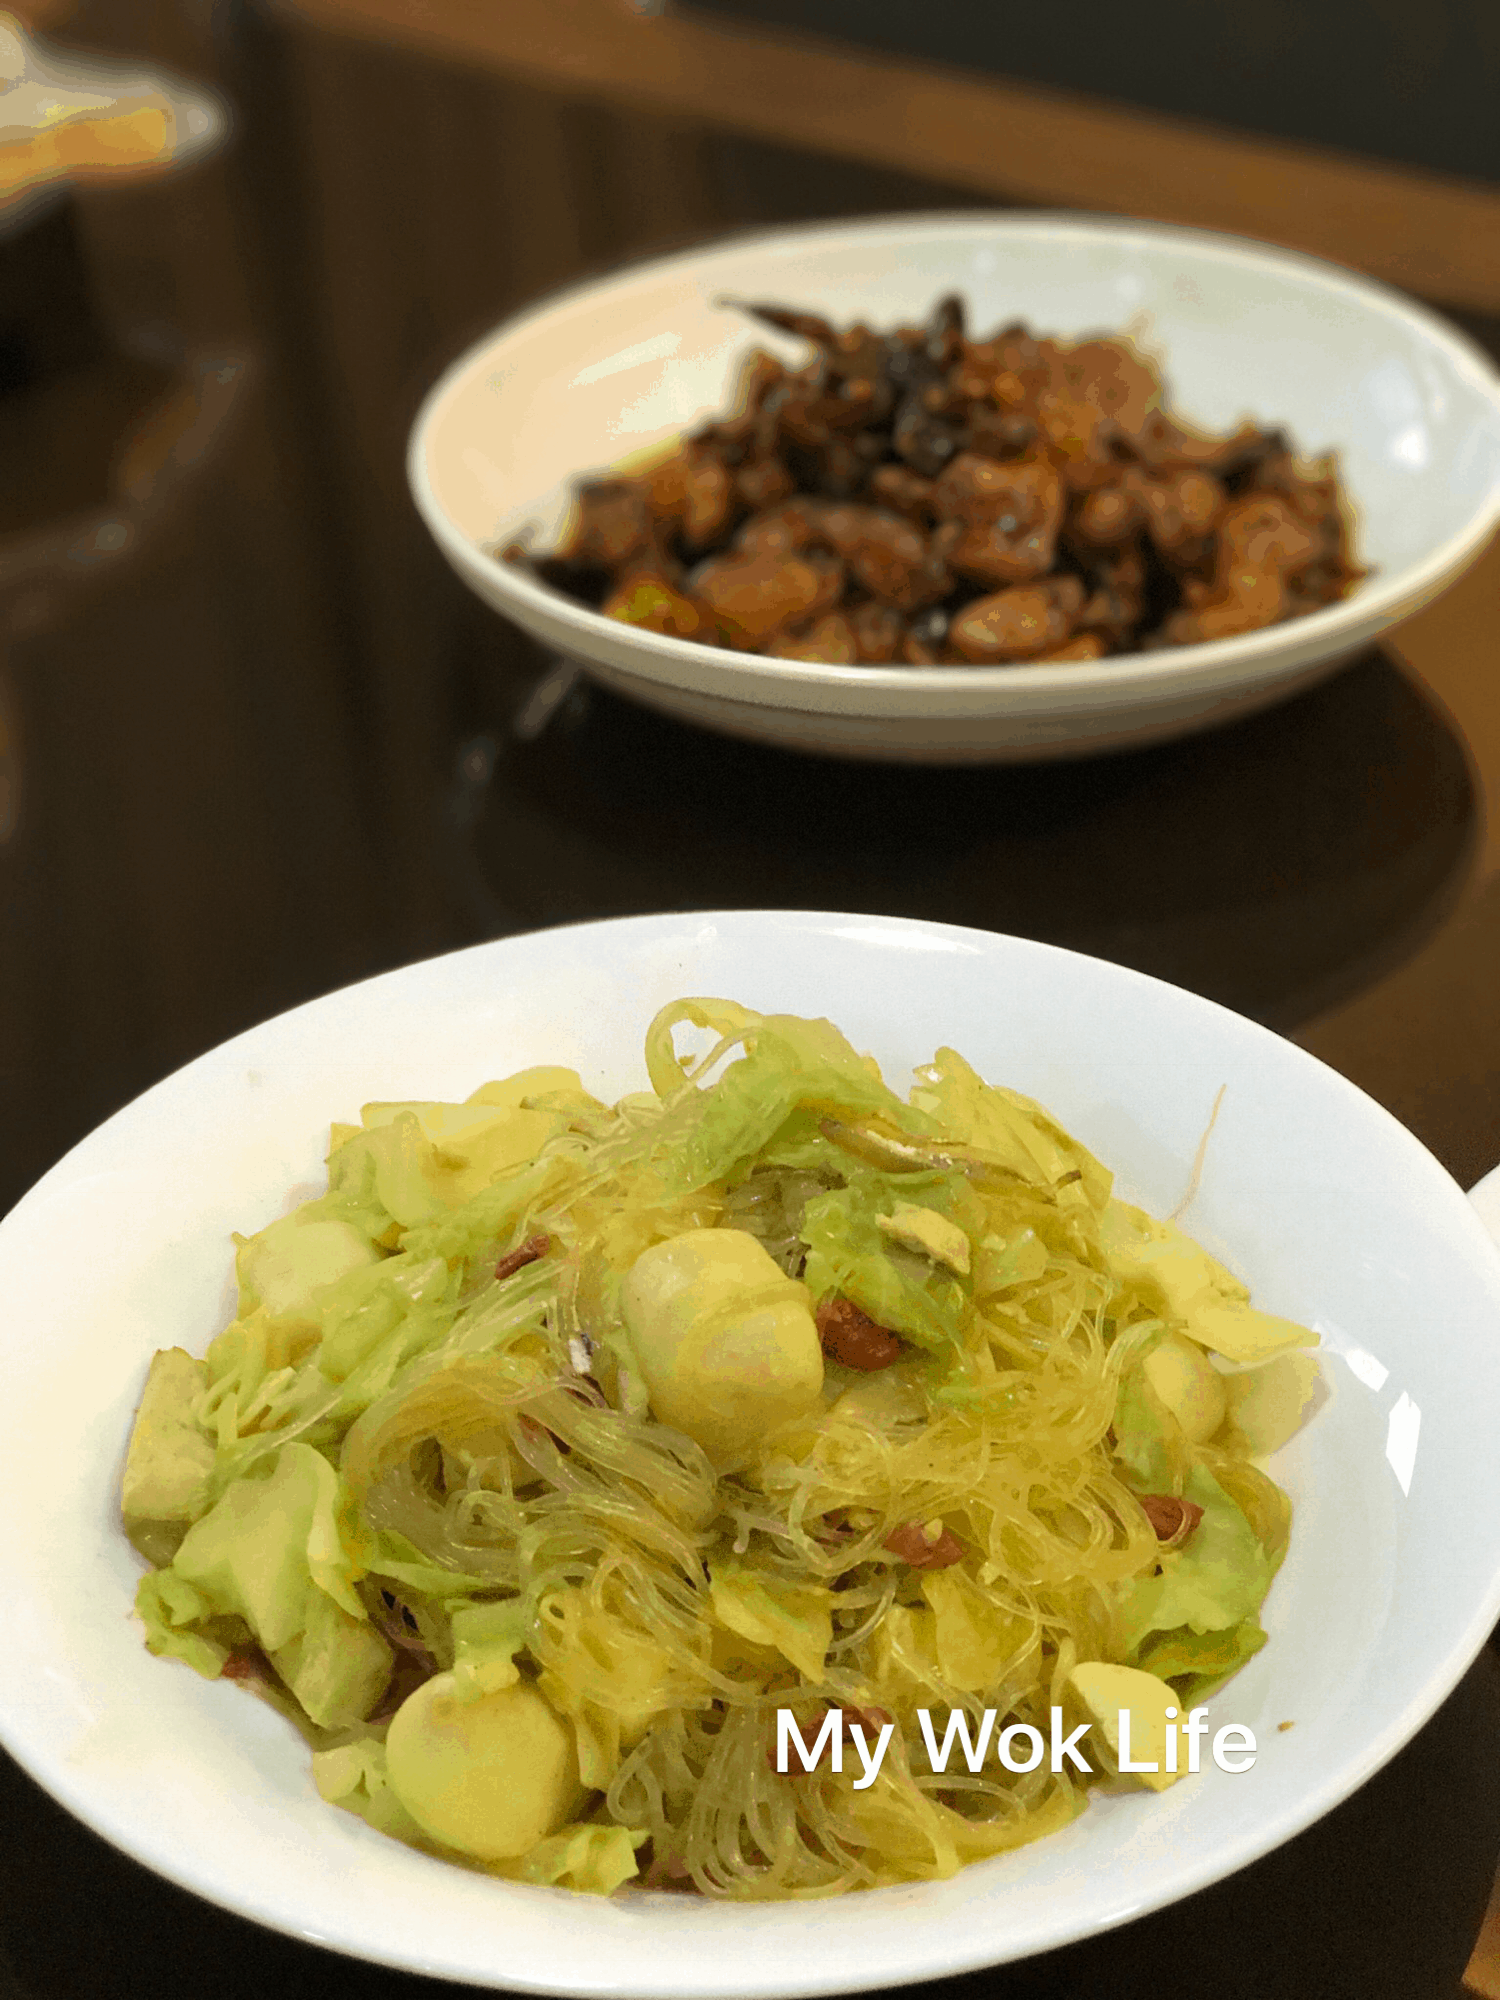 My Wok Life Cooking Blog Stir Fried Cabbage & Tang Hoon (Glass Noodle) For Weight Loss